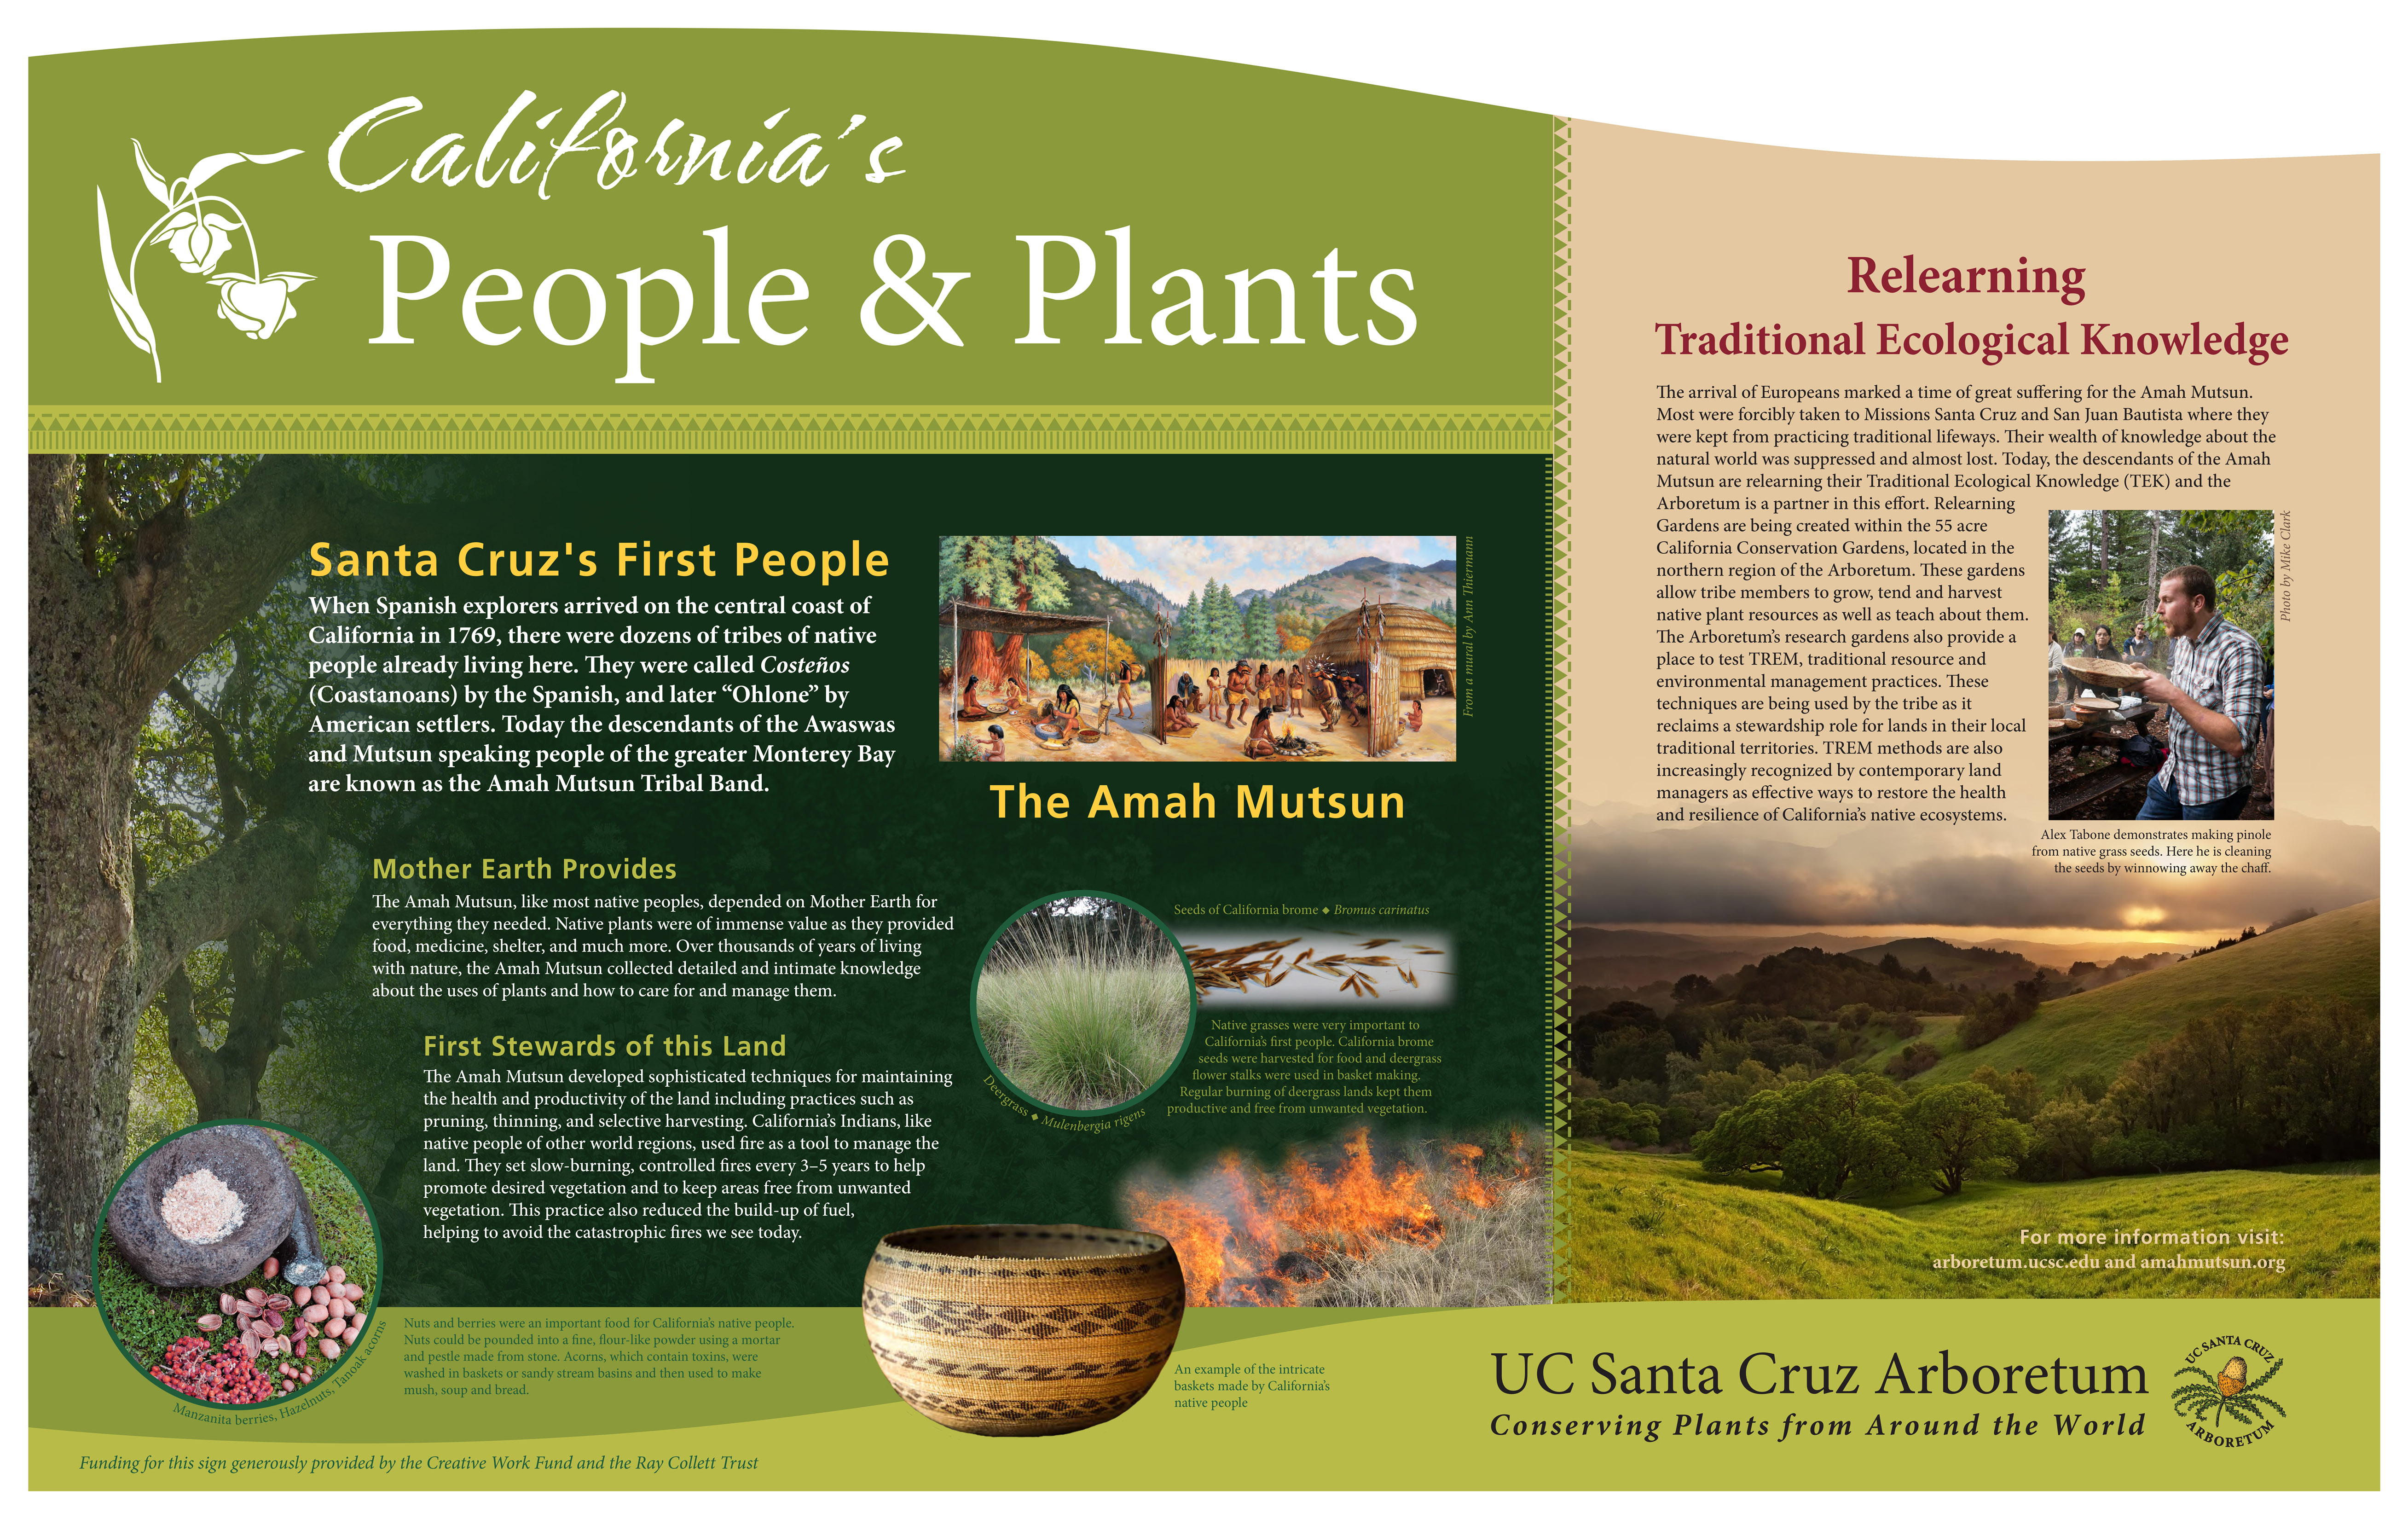 2-ucsc-arboretum_california-native-garden_first-peoples-and-plants.jpg